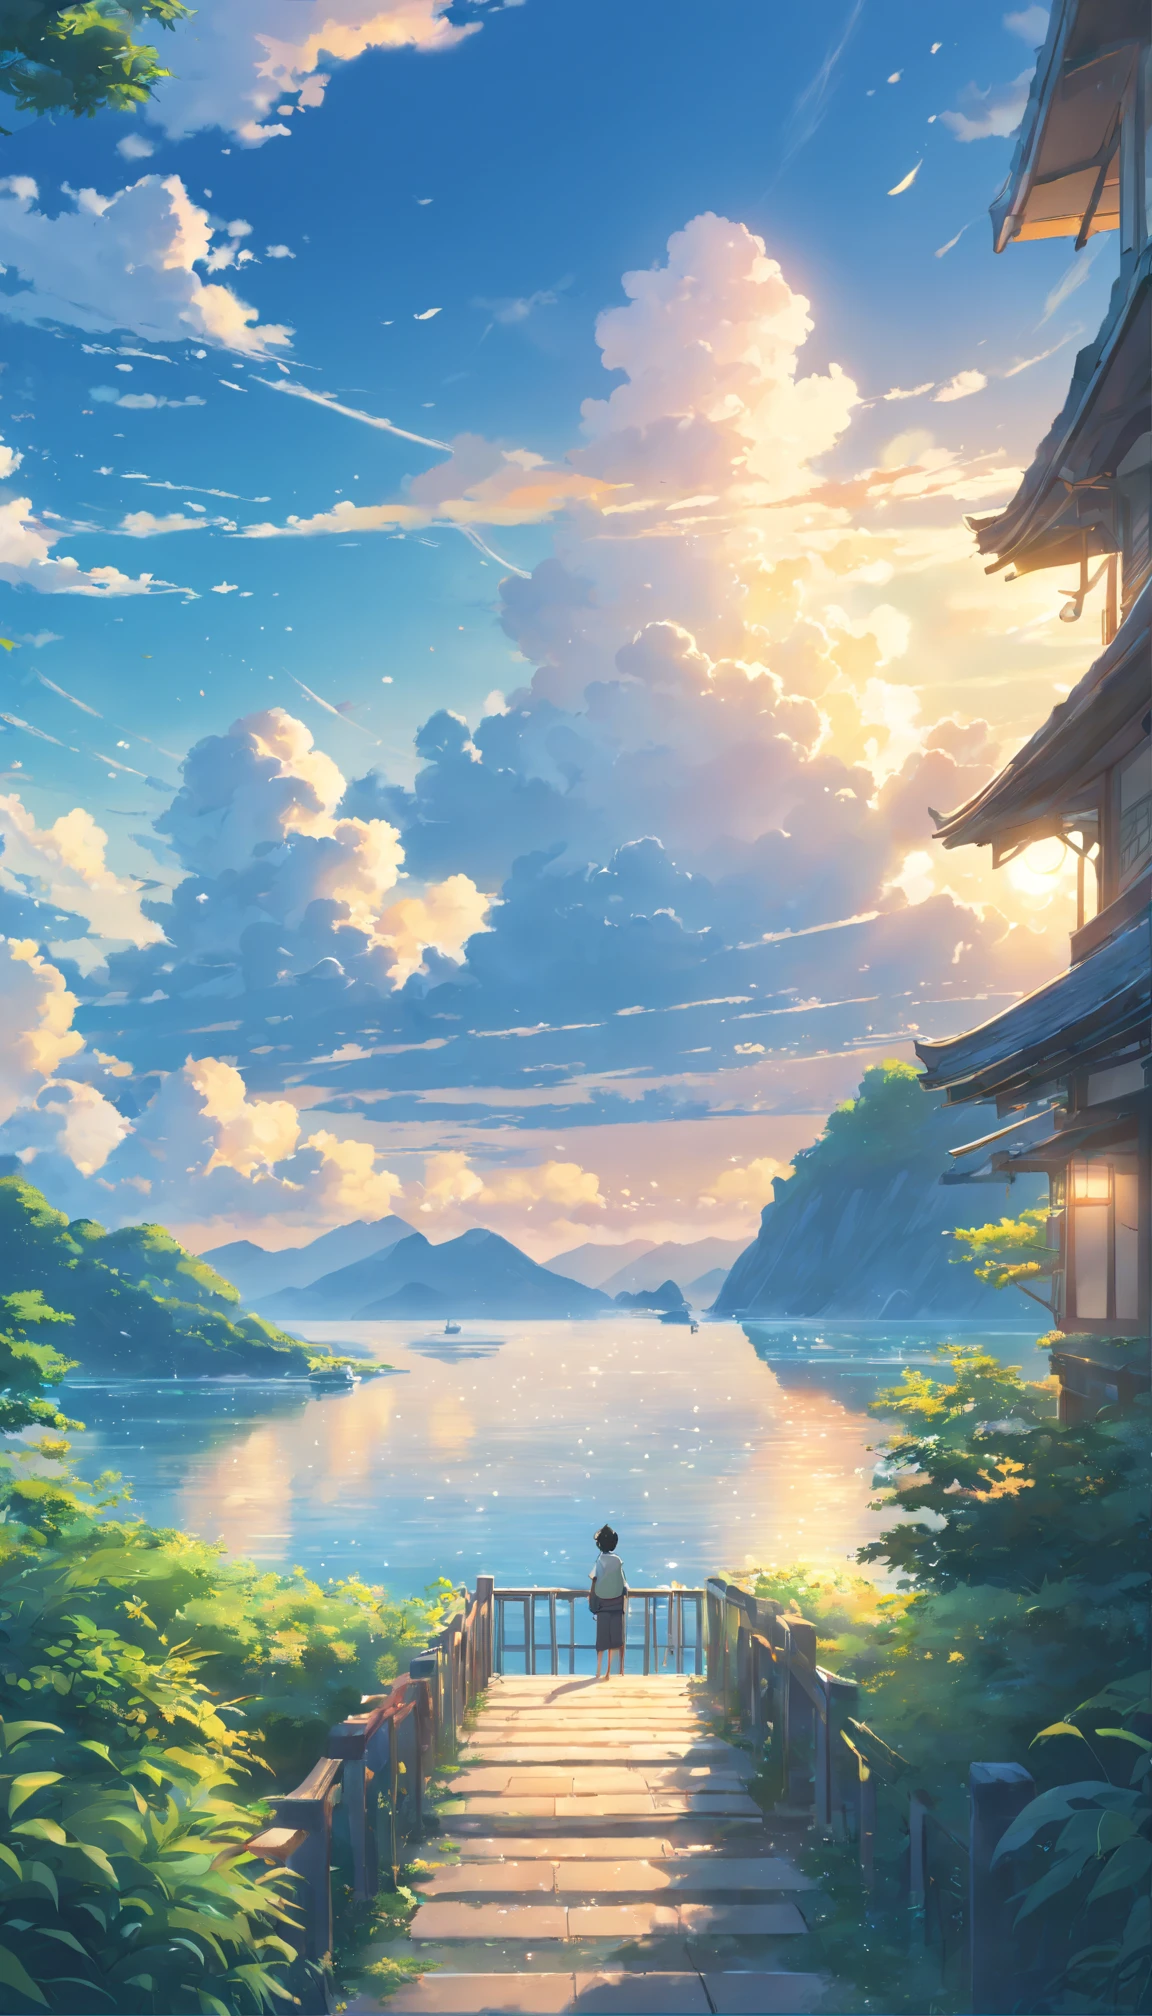 (high quality, masterpiece:1.2), (movie stills), (19-year-old man) sitting on the clouds above the sea, (dream-like atmosphere), (detailed clouds and water), (realistic, photorealistic:1.37), (vibrant colors), (soft lighting), (gentle breeze), (serene expression), (magical scenery), (ethereal landscape), (distant horizon), (transcendent mood), (golden sunlight), (subtle reflections), (impeccable composition), (dynamic perspective), (floating sensation), (peaceful ambiance), (fantasy elements), (harmonious color palette), (silhouette of distant islands), (whimsical details), (sublime tranquility), (hidden secrets), (subtle textures), (immersive experience), (fine art aesthetics), (captivating atmosphere), (magical realism), (awe-inspiring), (unforgettable), (eternal beauty).